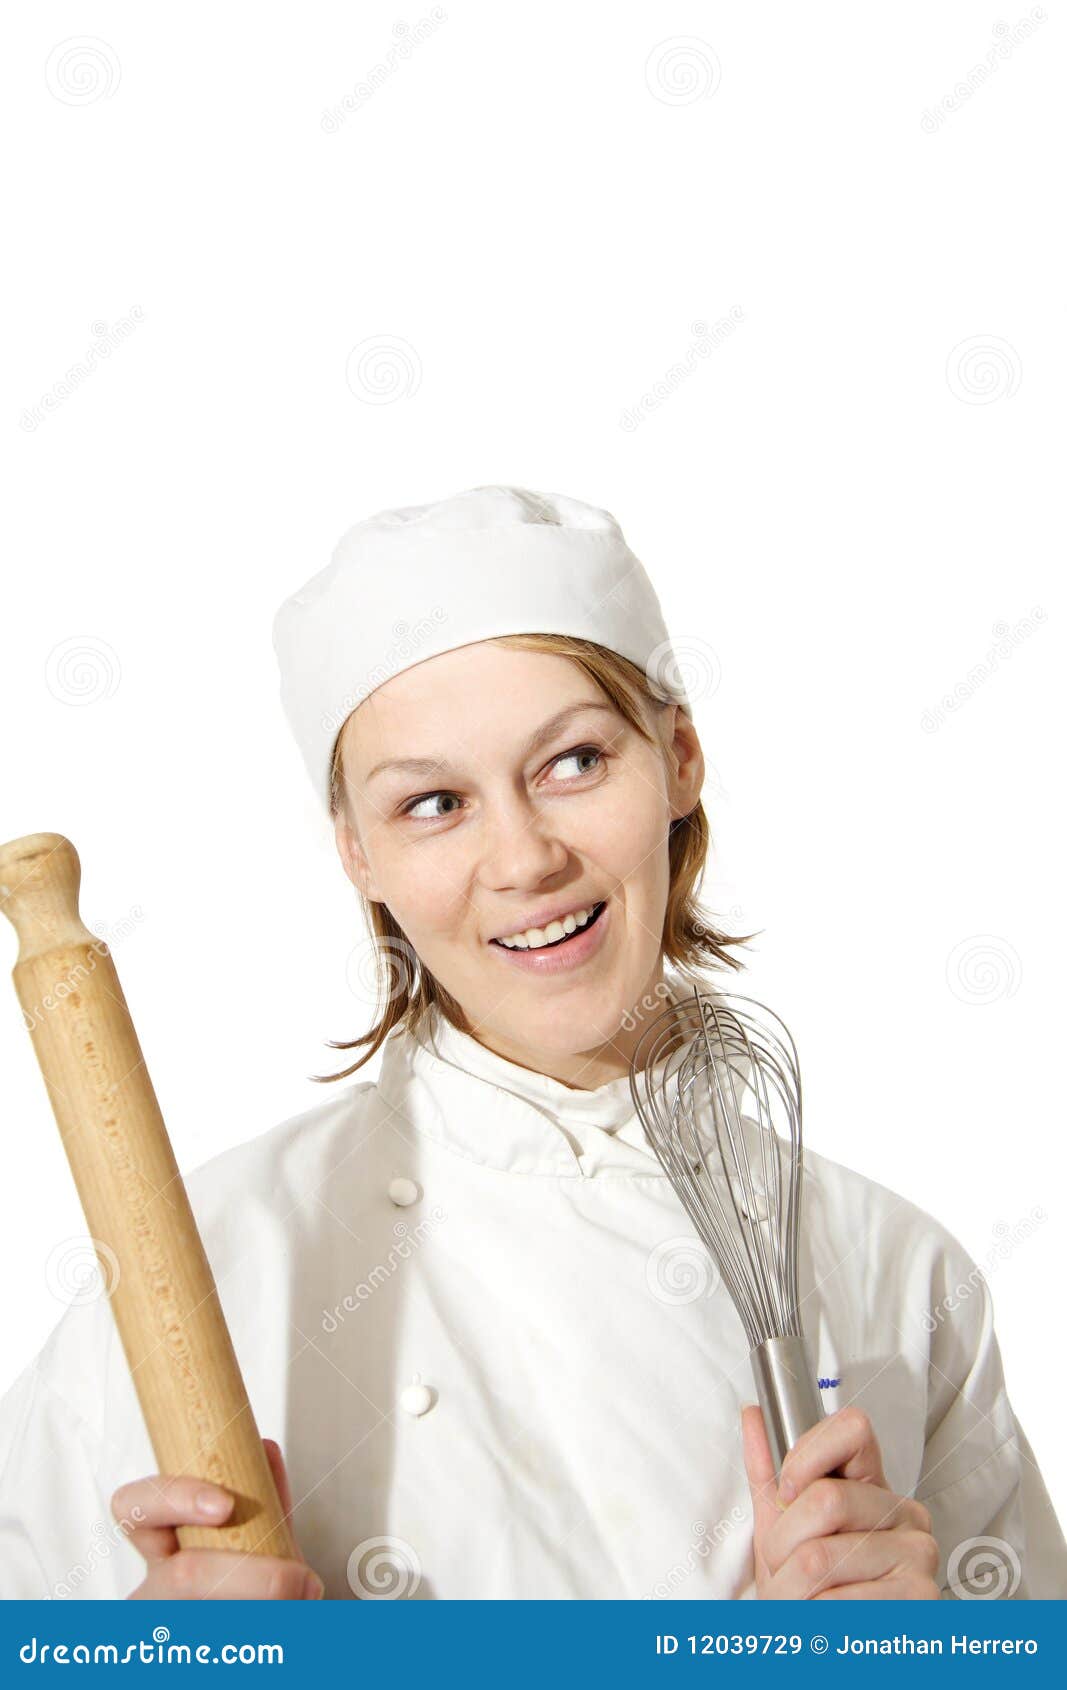 Happy chef stock image. Image of occupation, kitchen - 12039729